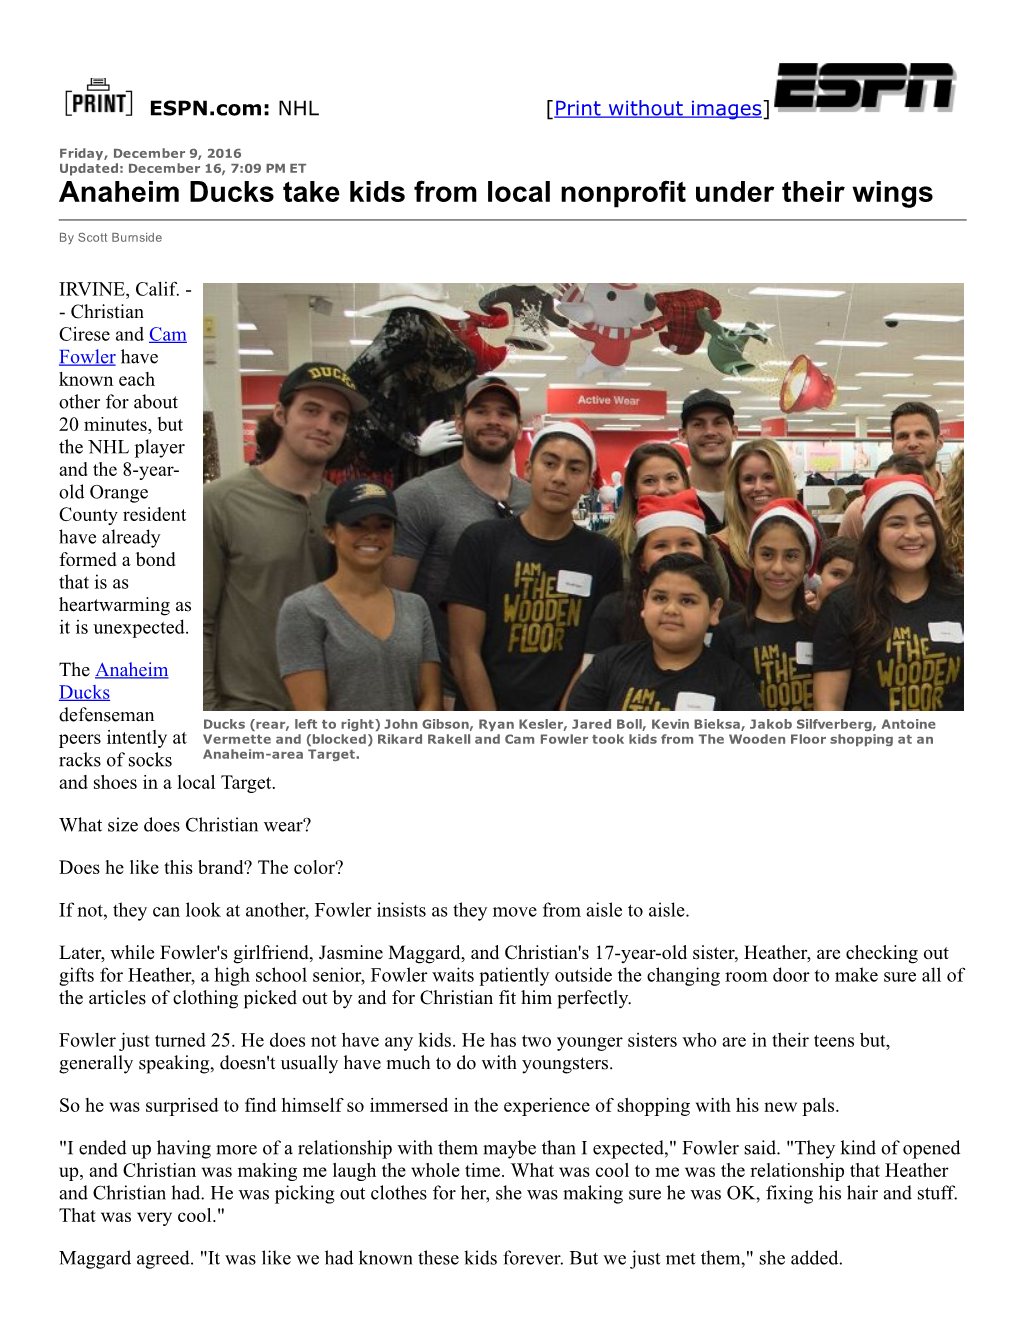 Anaheim Ducks Take Kids from Local Nonprofit Under Their Wings